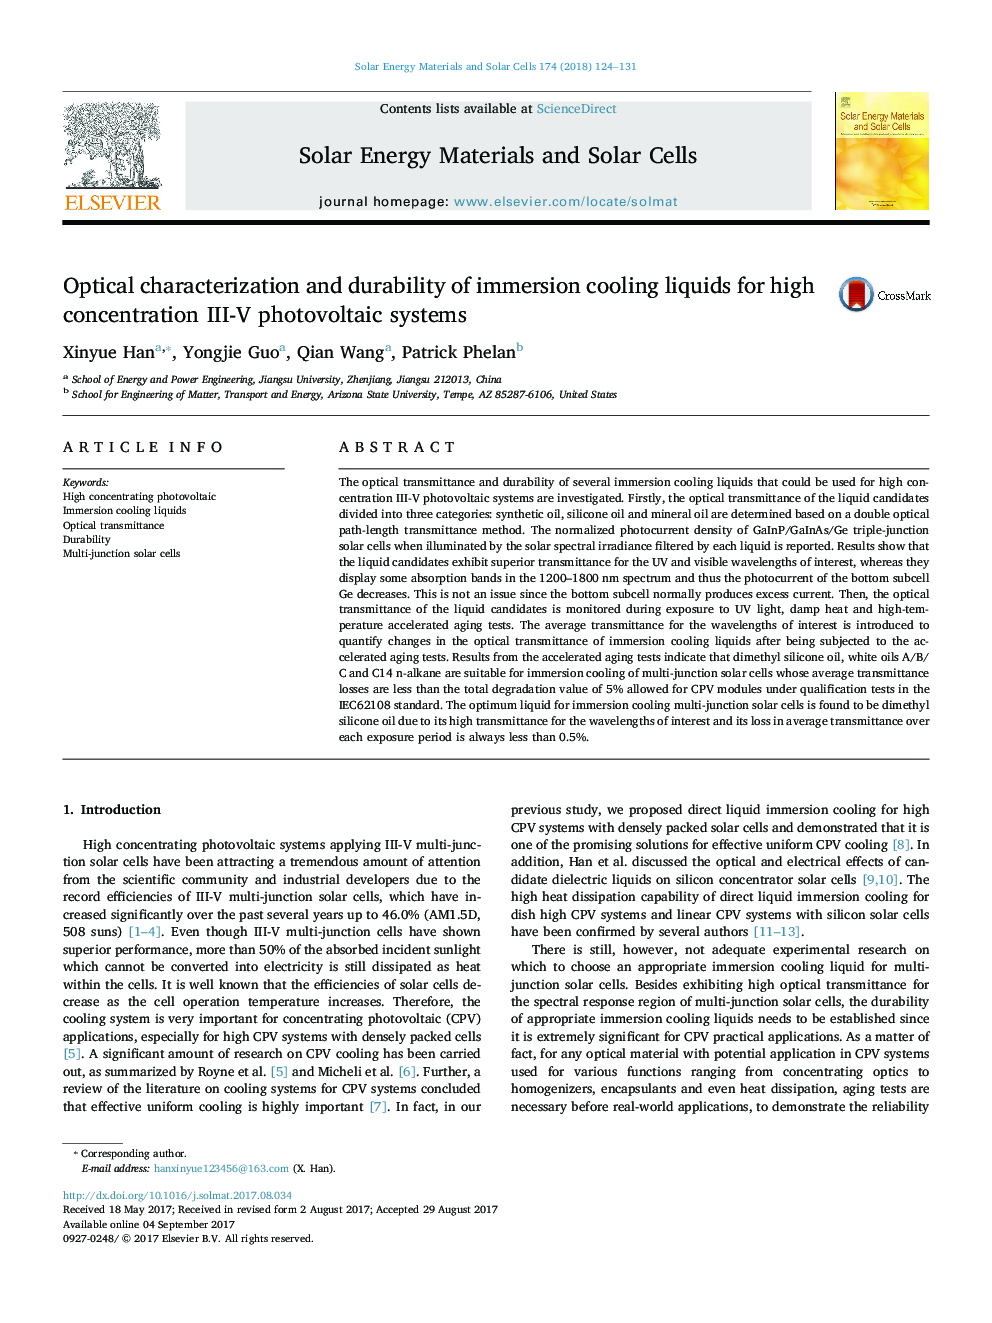 Optical characterization and durability of immersion cooling liquids for high concentration III-V photovoltaic systems